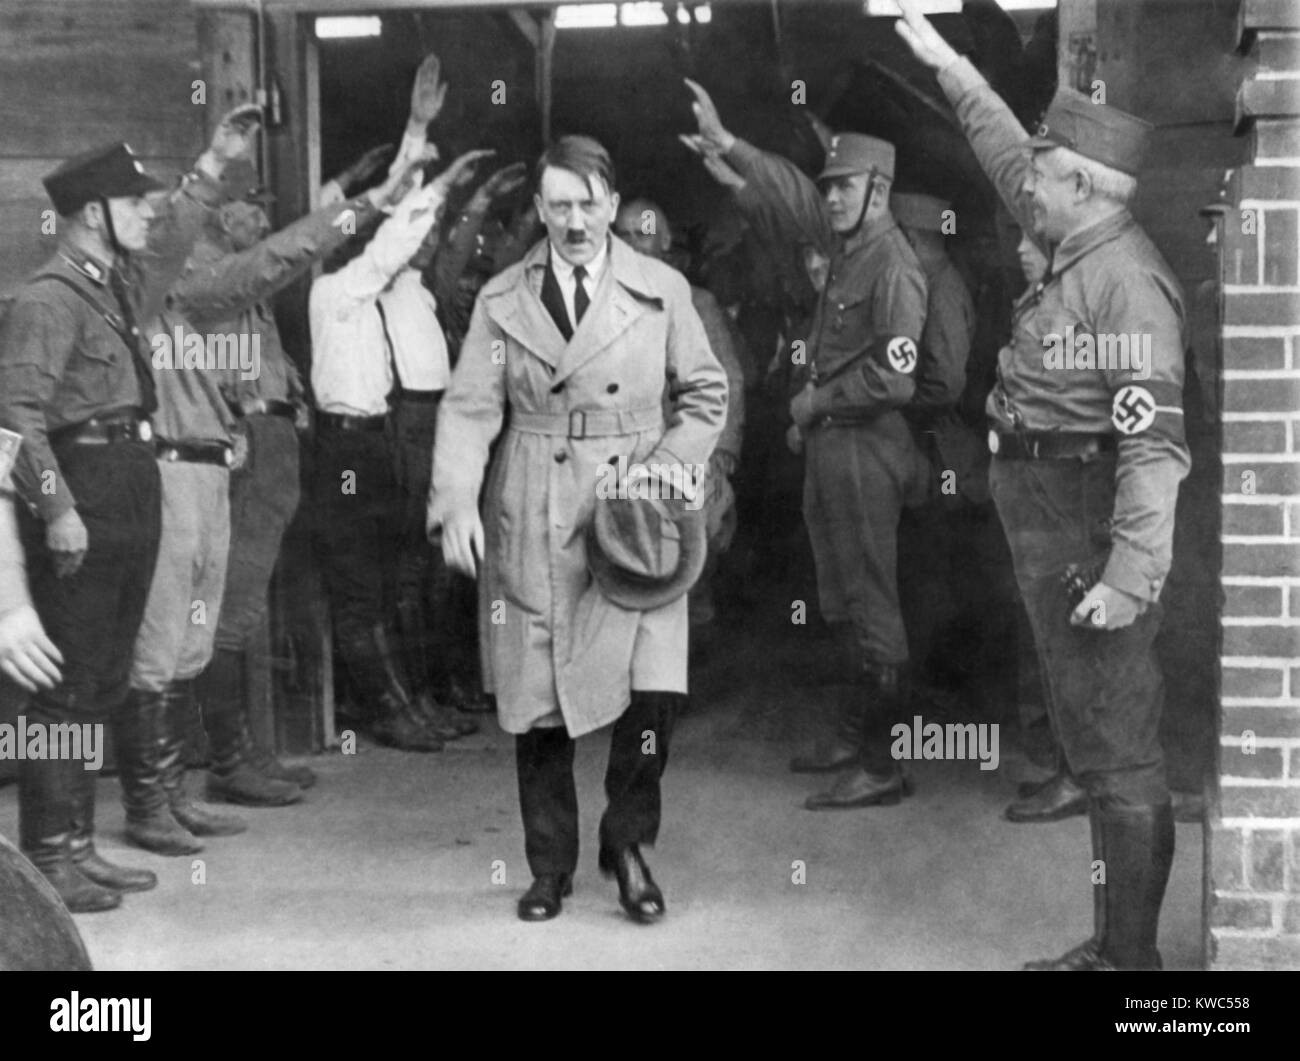 Adolf Hitler, emerging from a Nazi party meeting after a speech, 1930s. He is saluted by uniformed Storm Troopers. Hitler wears a business suit under his trench coat, suggesting the photo was taken during his early chancellorship. (BSLOC 2015 13 54) Stock Photo